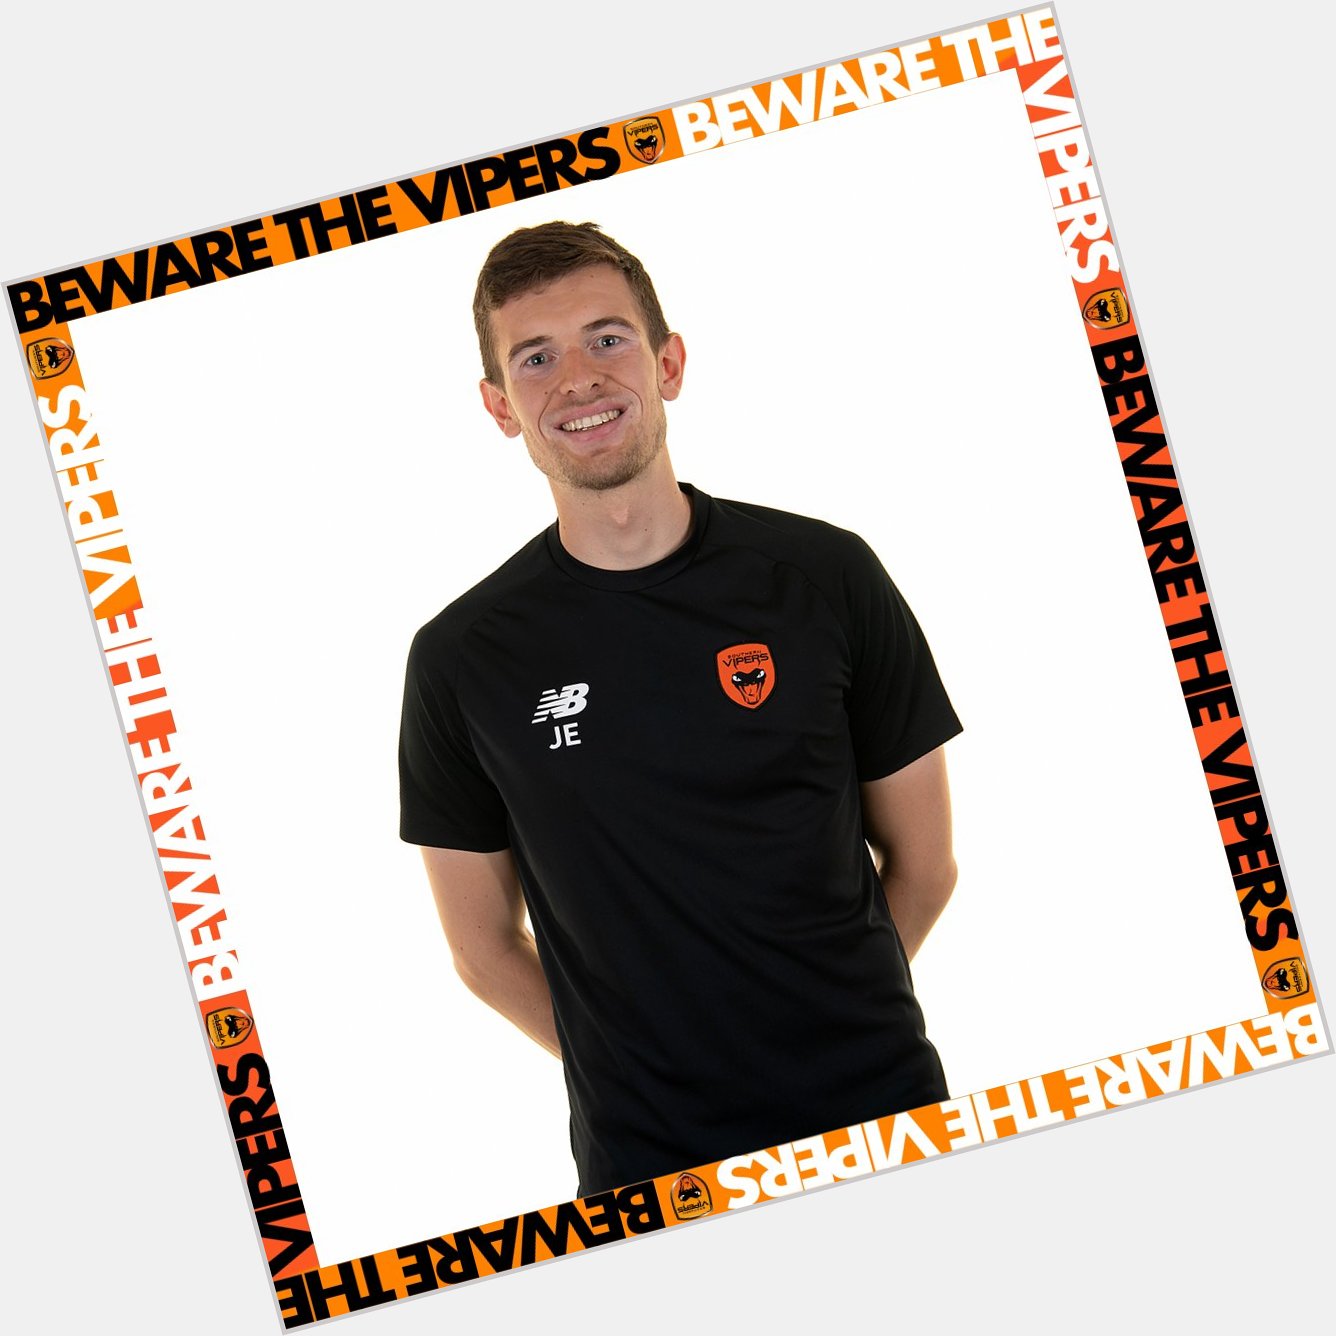 Happy 2  7  th birthday to our S&C coach, John Edwards Have a great day John! 